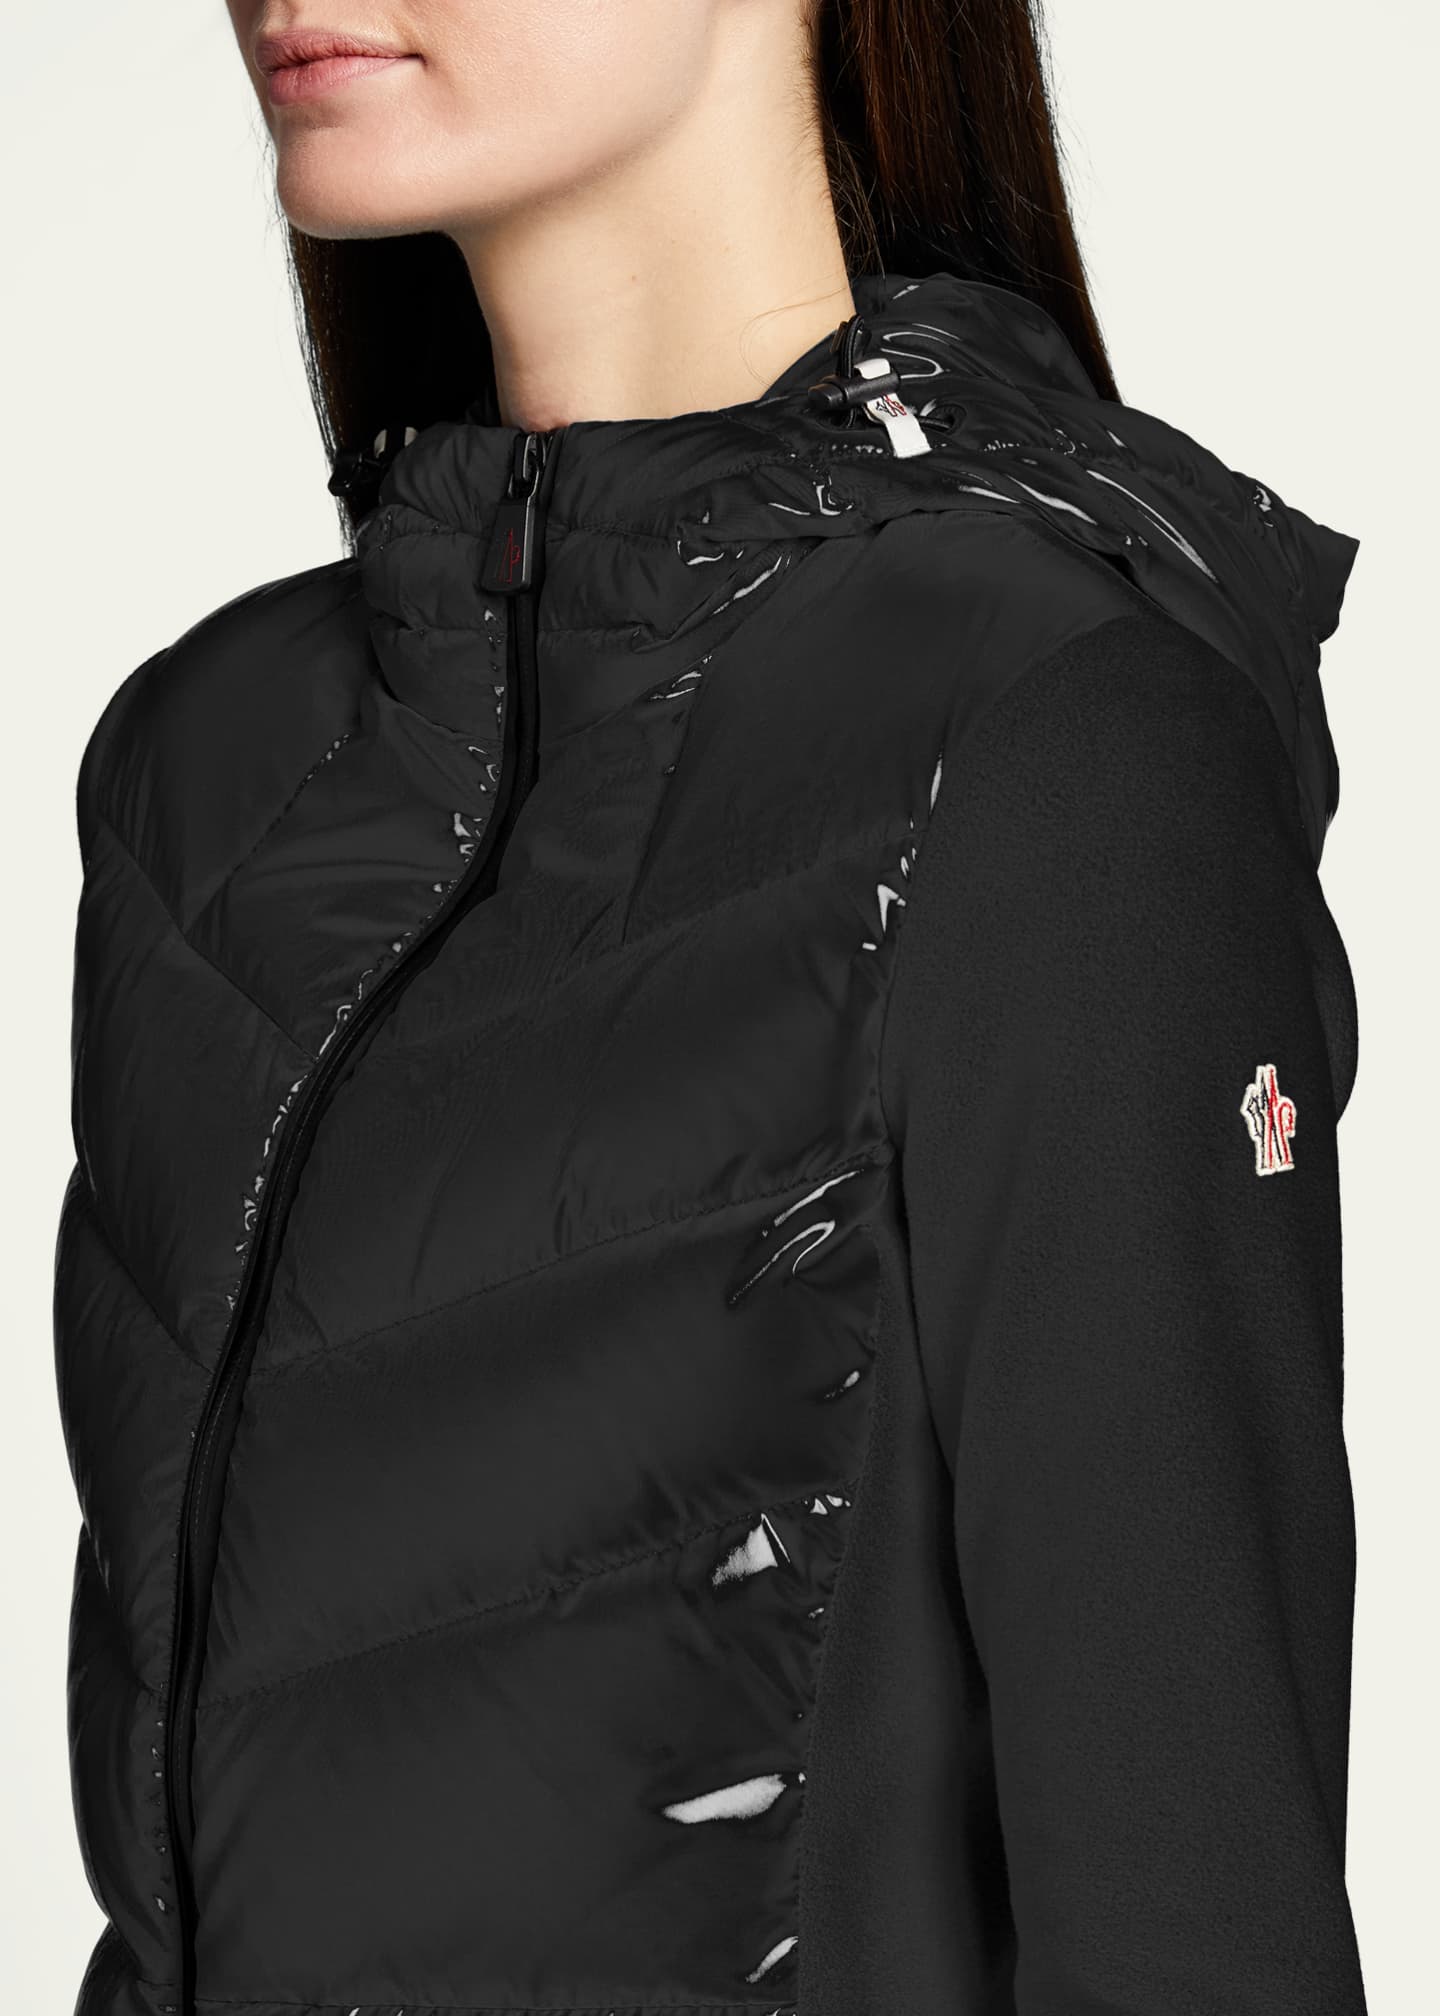 Moncler Grenoble Quilted 750 Fill Power Down & Fleece Hooded